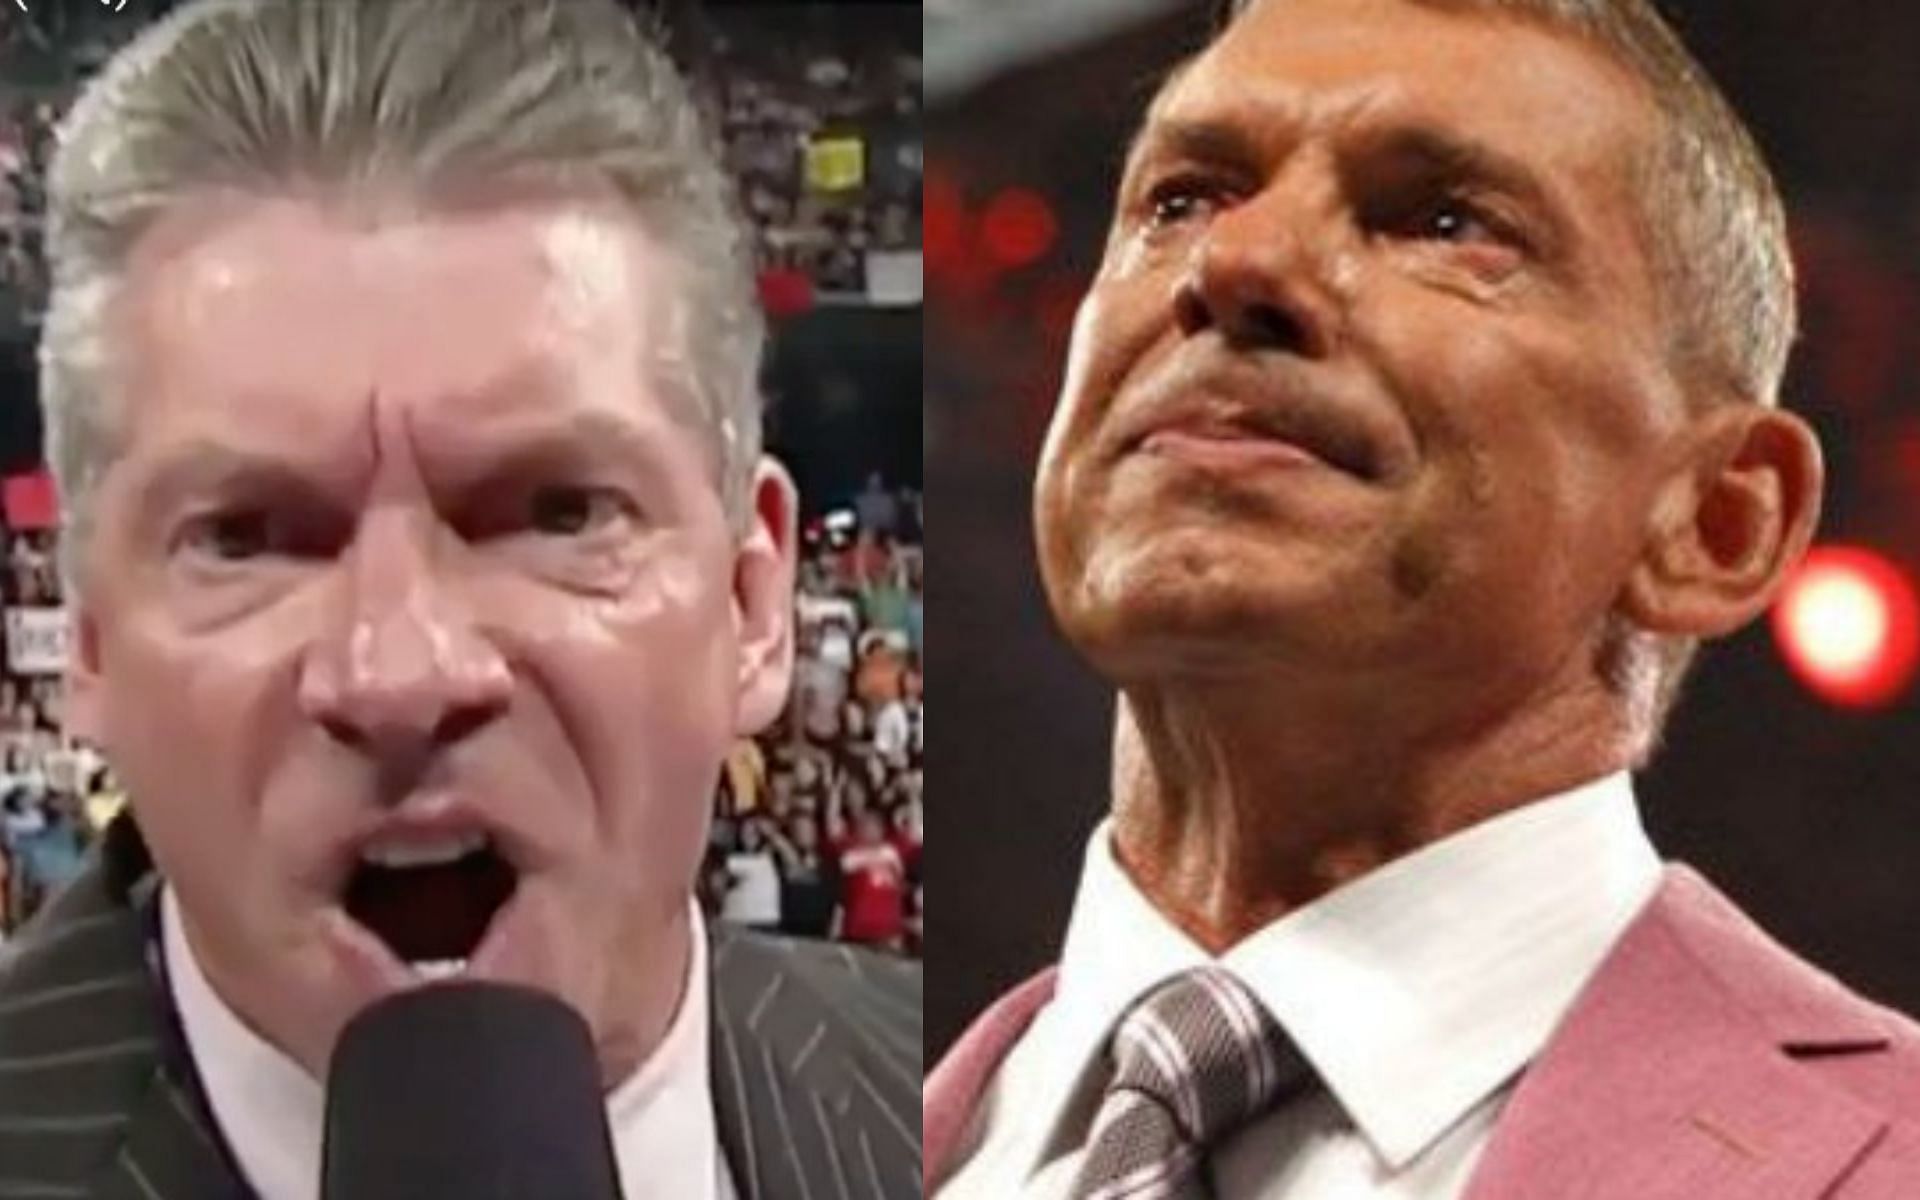 Vince McMahon has found himself in precarious situations several times over his career